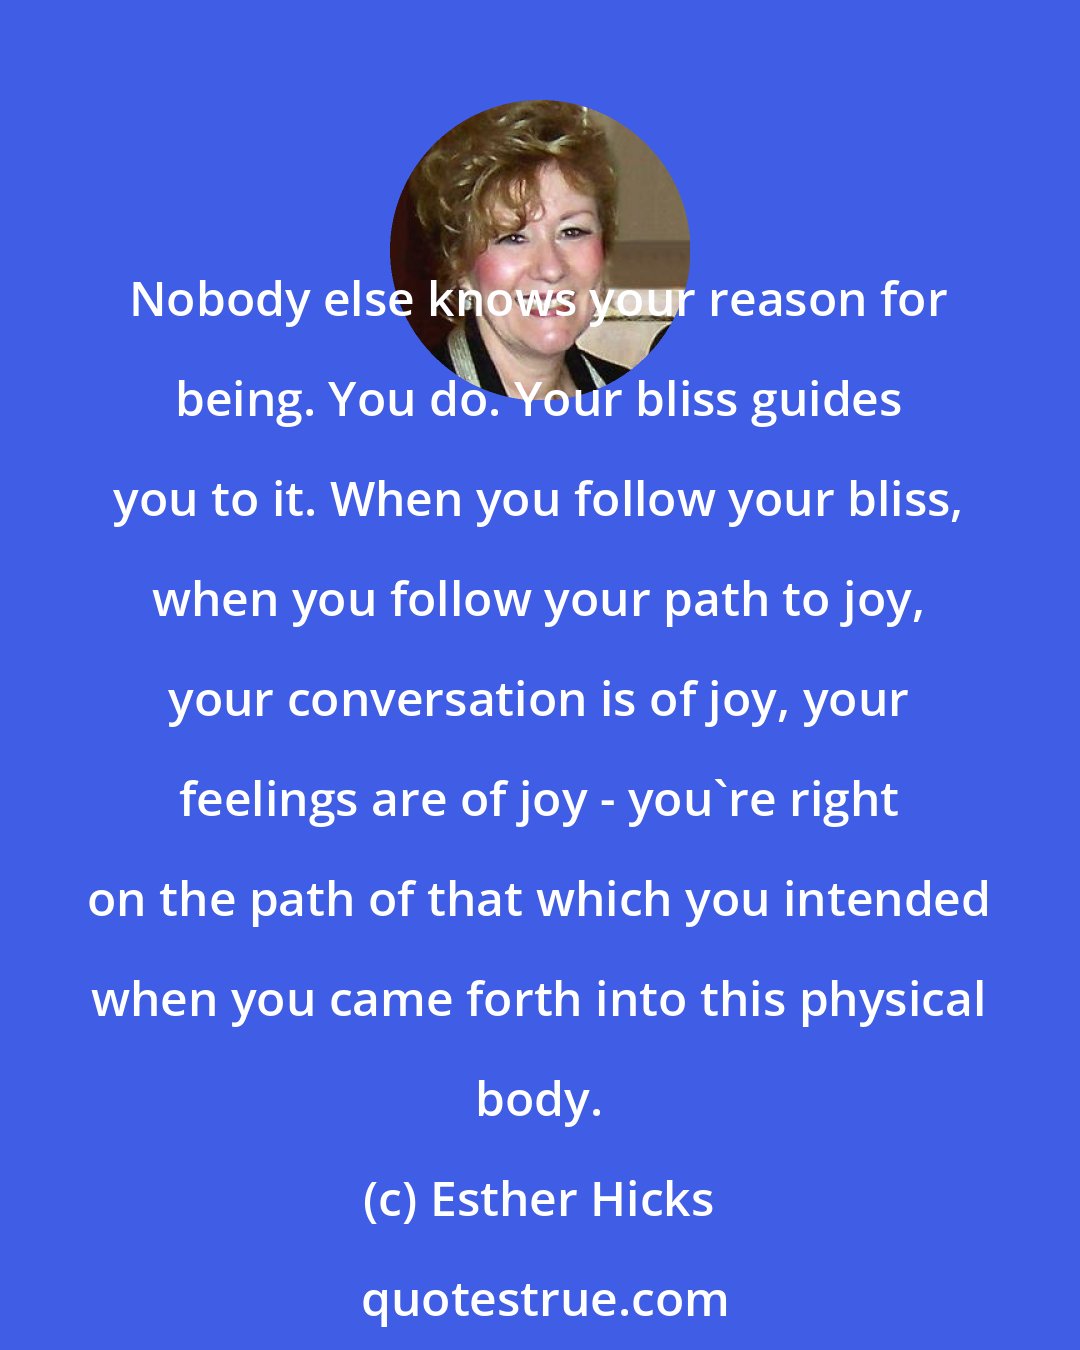 Esther Hicks: Nobody else knows your reason for being. You do. Your bliss guides you to it. When you follow your bliss, when you follow your path to joy, your conversation is of joy, your feelings are of joy - you're right on the path of that which you intended when you came forth into this physical body.